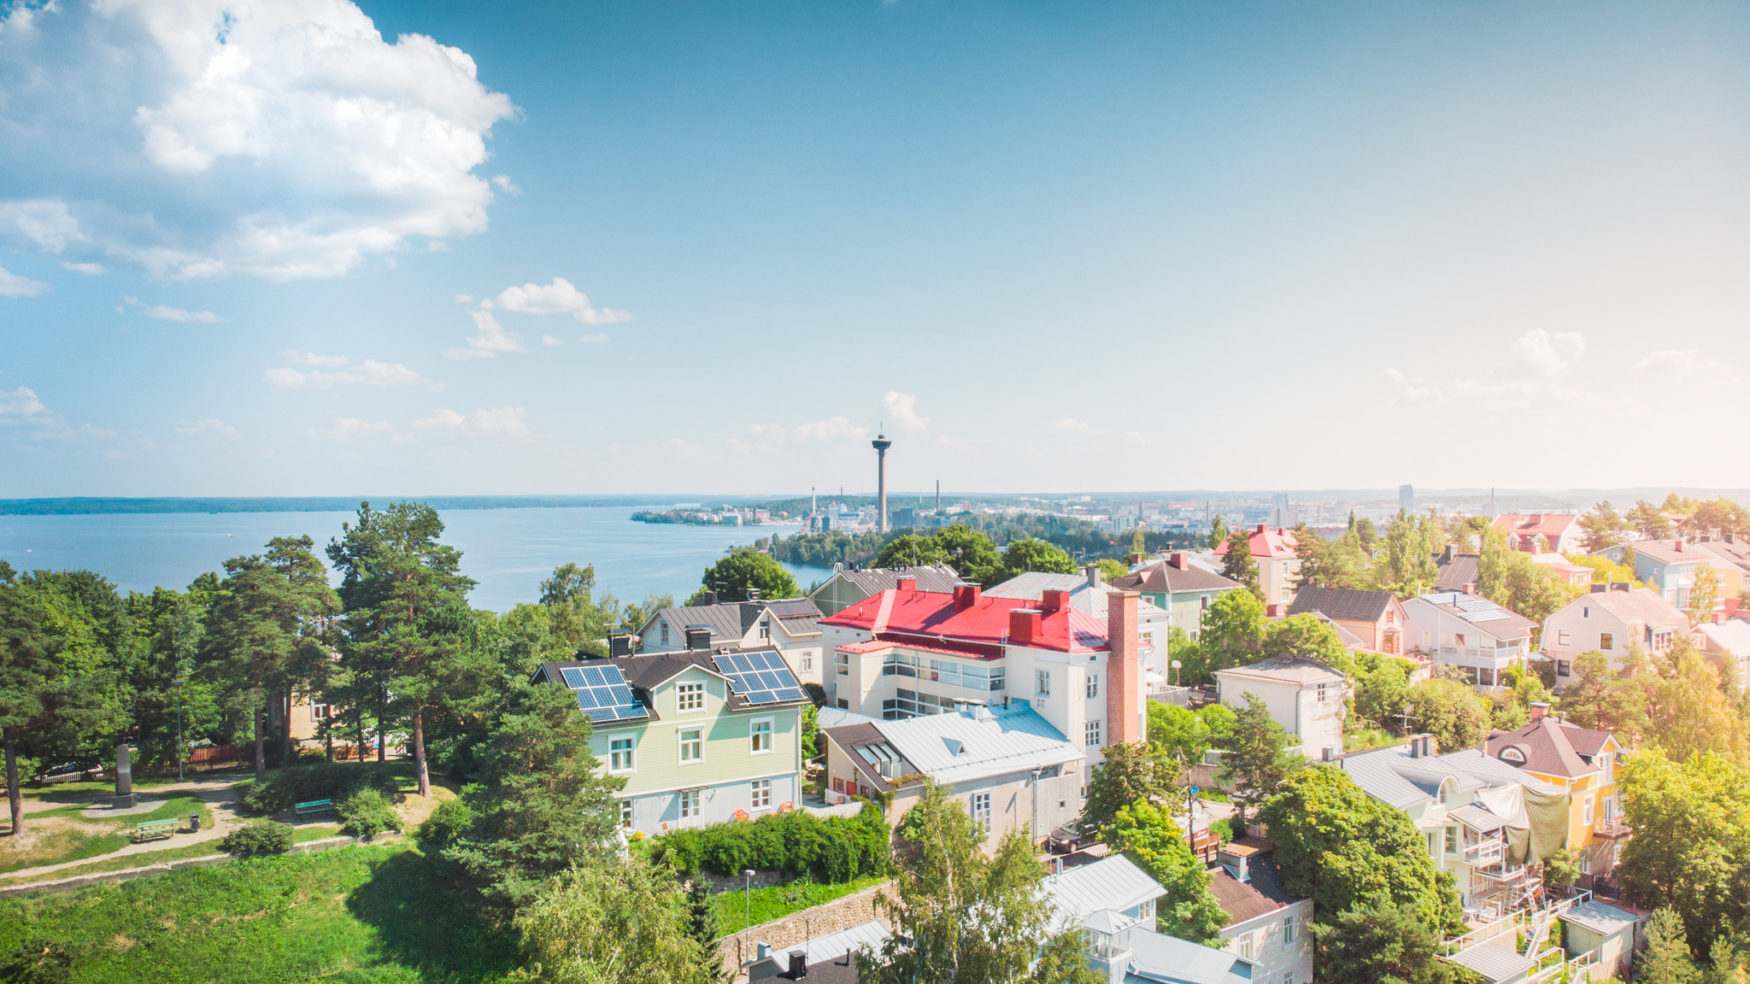 Talent Tampere - Drone view of Tampere from Pispala in summer, Picture by Laura Vanzo